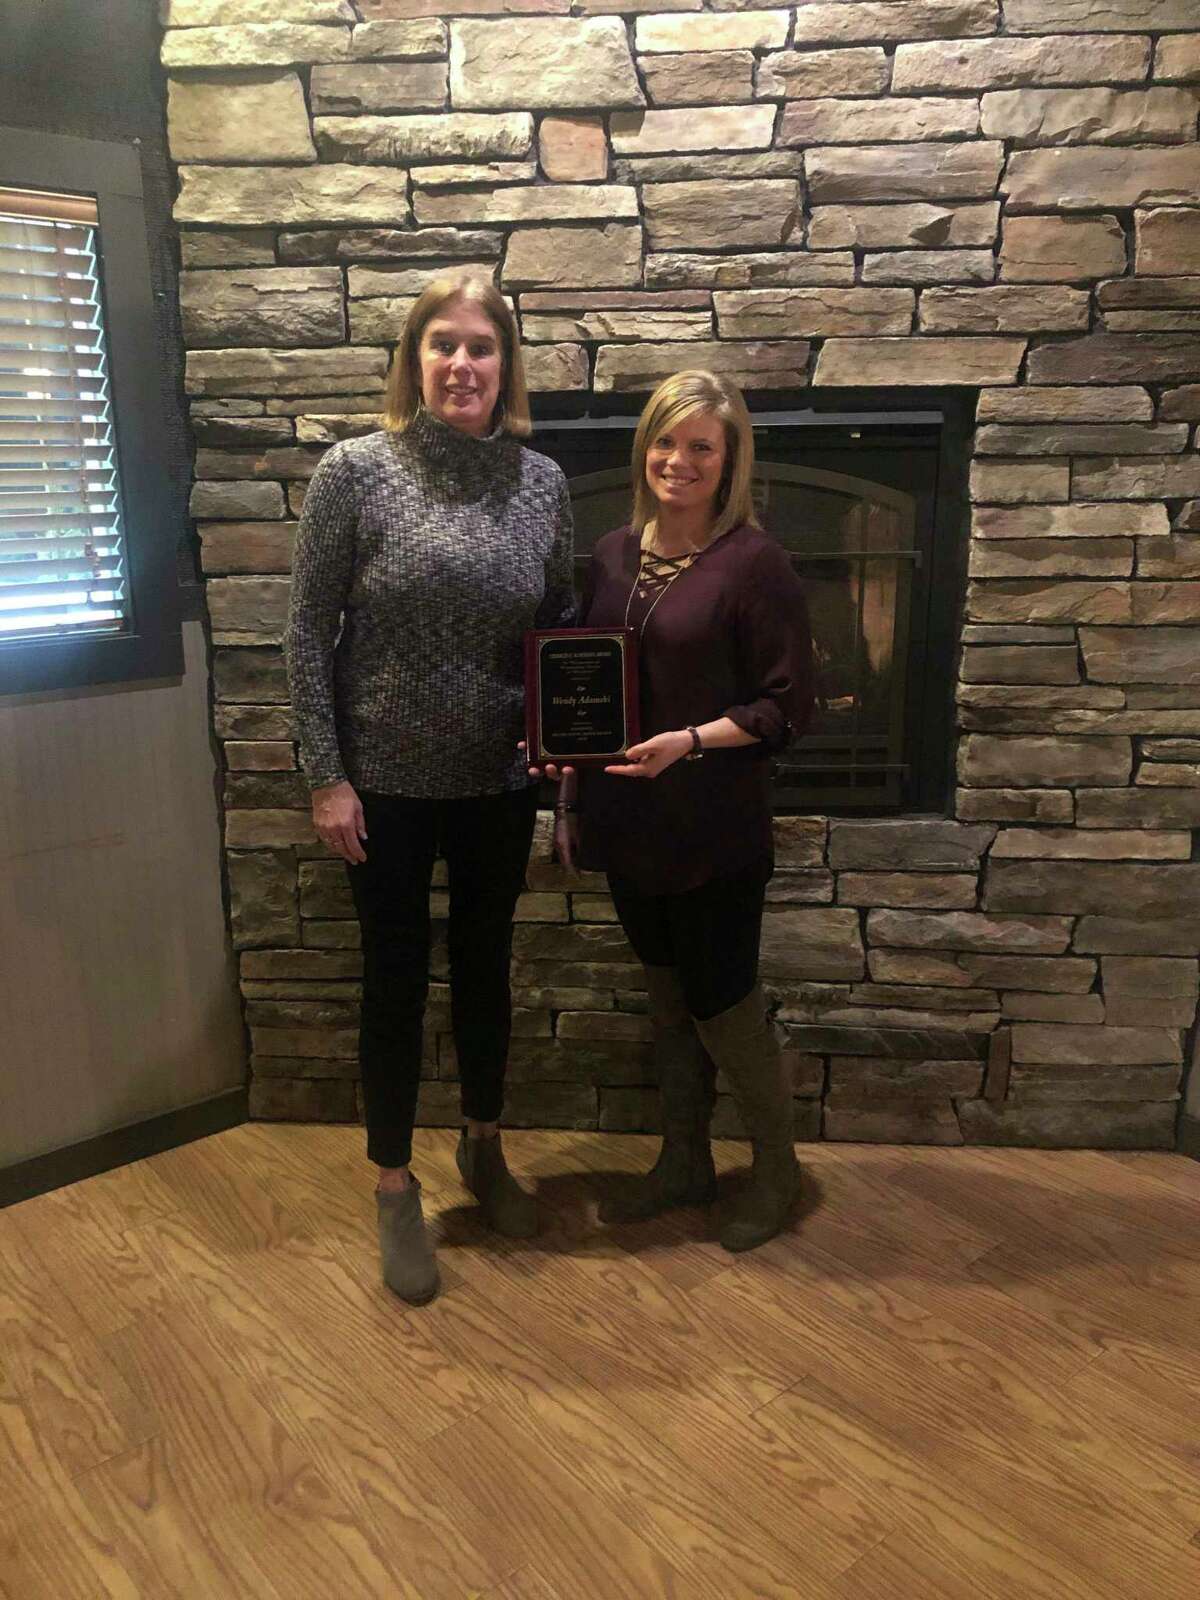 Wendy Adamski (left) has participated with the Manistee Recreation Association for many years with a variety of different programs, including coaching and volunteering.  She was recently named the individual winner of this year's Charles E. Schoedel award from the MRA. Adamski is pictured with MRA executive director Stephanie Carpenter.  (Courtesy photo)